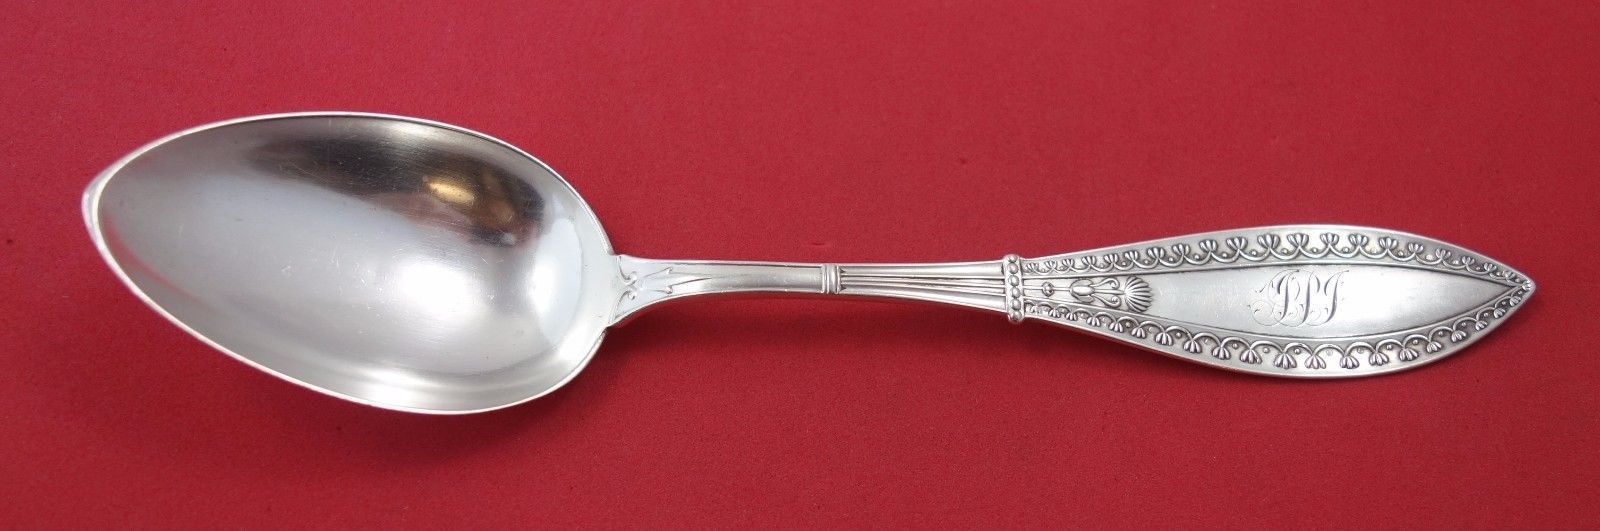 Primary image for Olympic by Schulz & Fischer Sterling Silver Place Soup Spoon 7 1/8" California